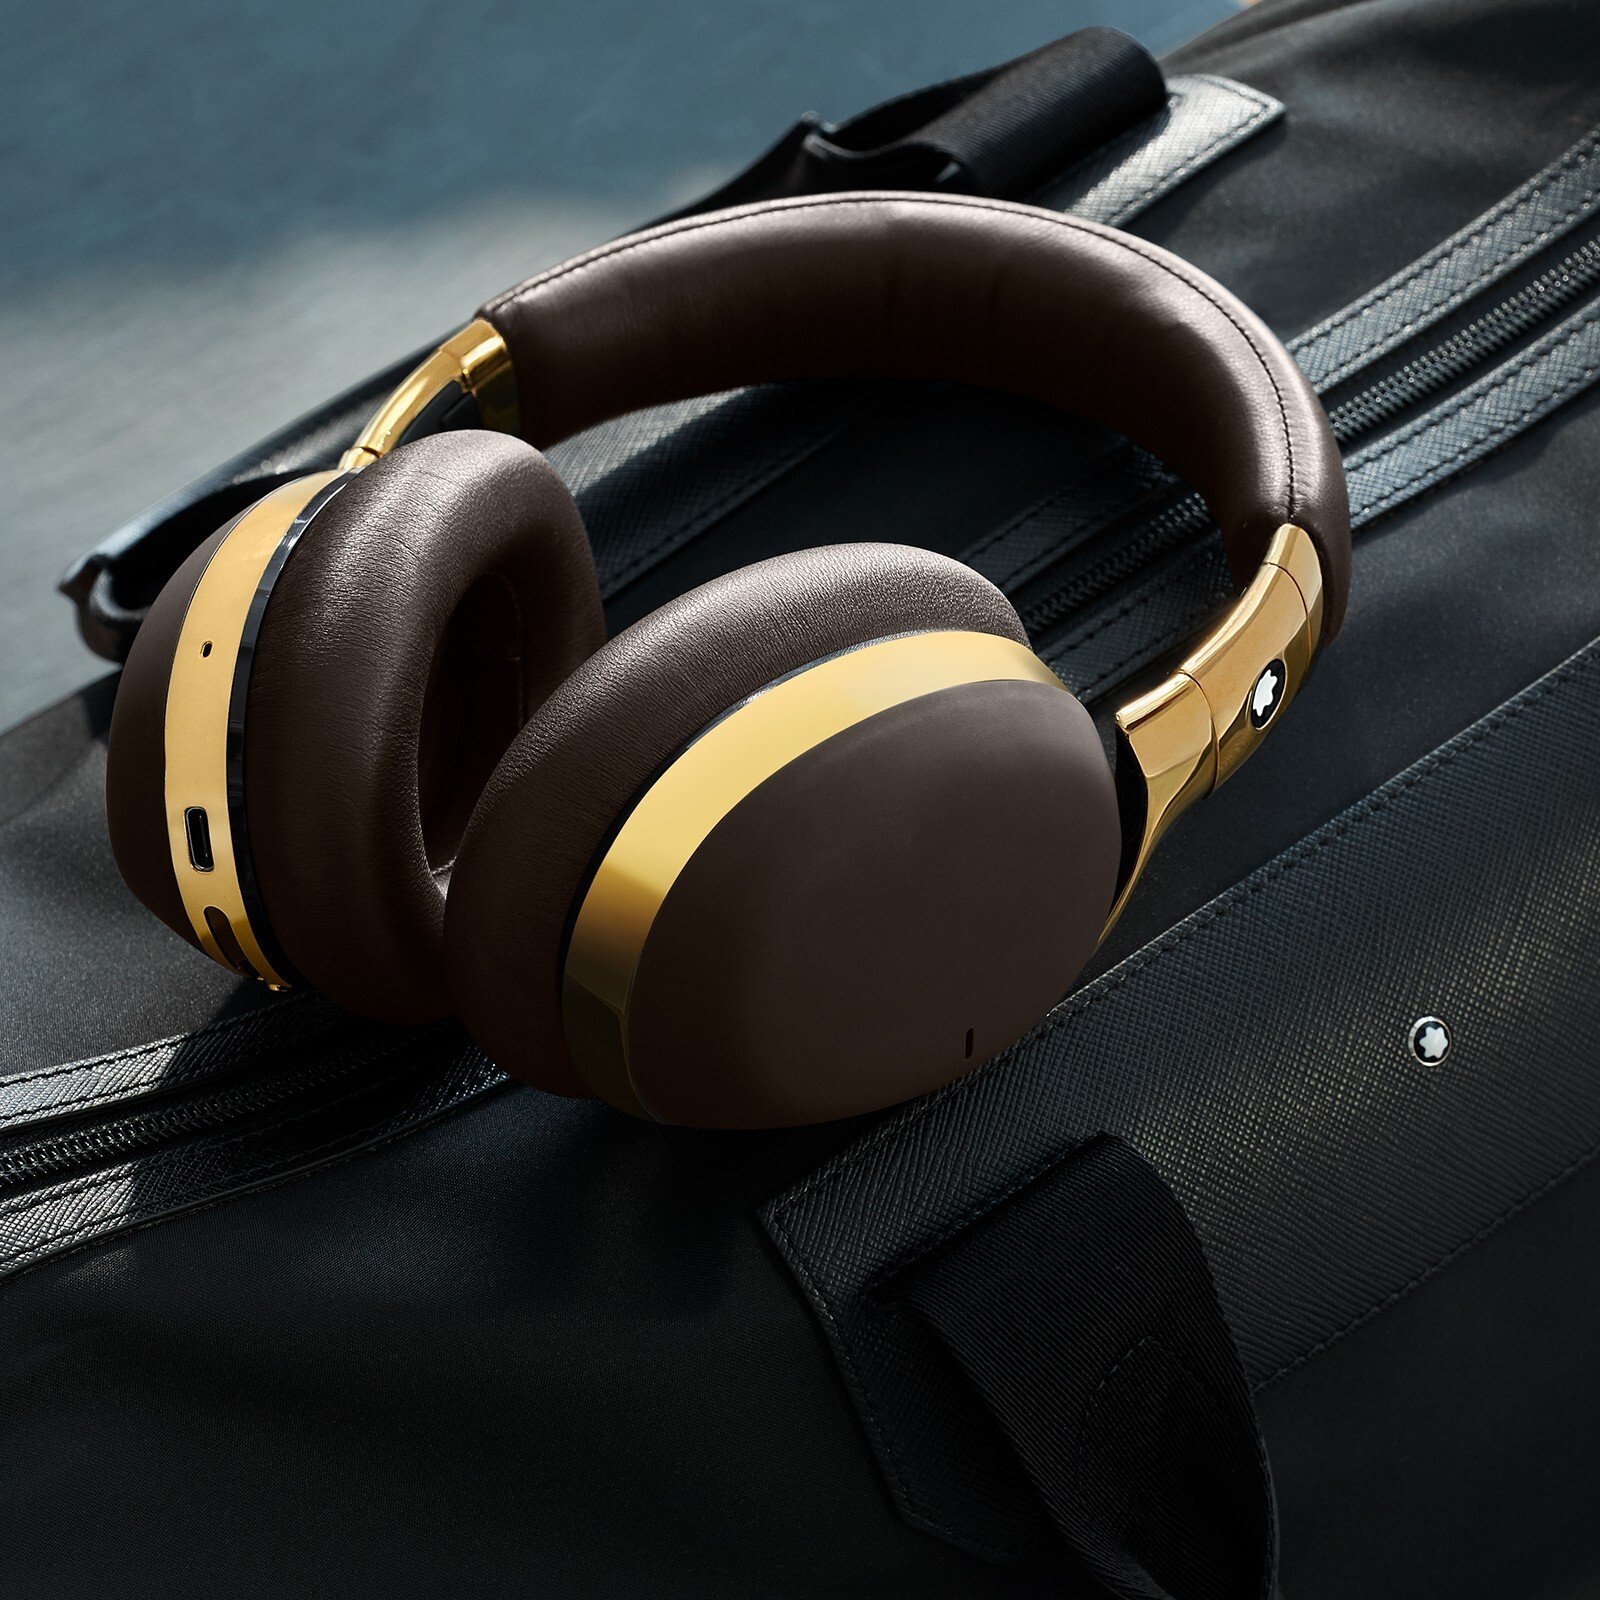 Montblanc MB01 headphones are a stylish and comfortable addition to the top end of the market. Photo: handout